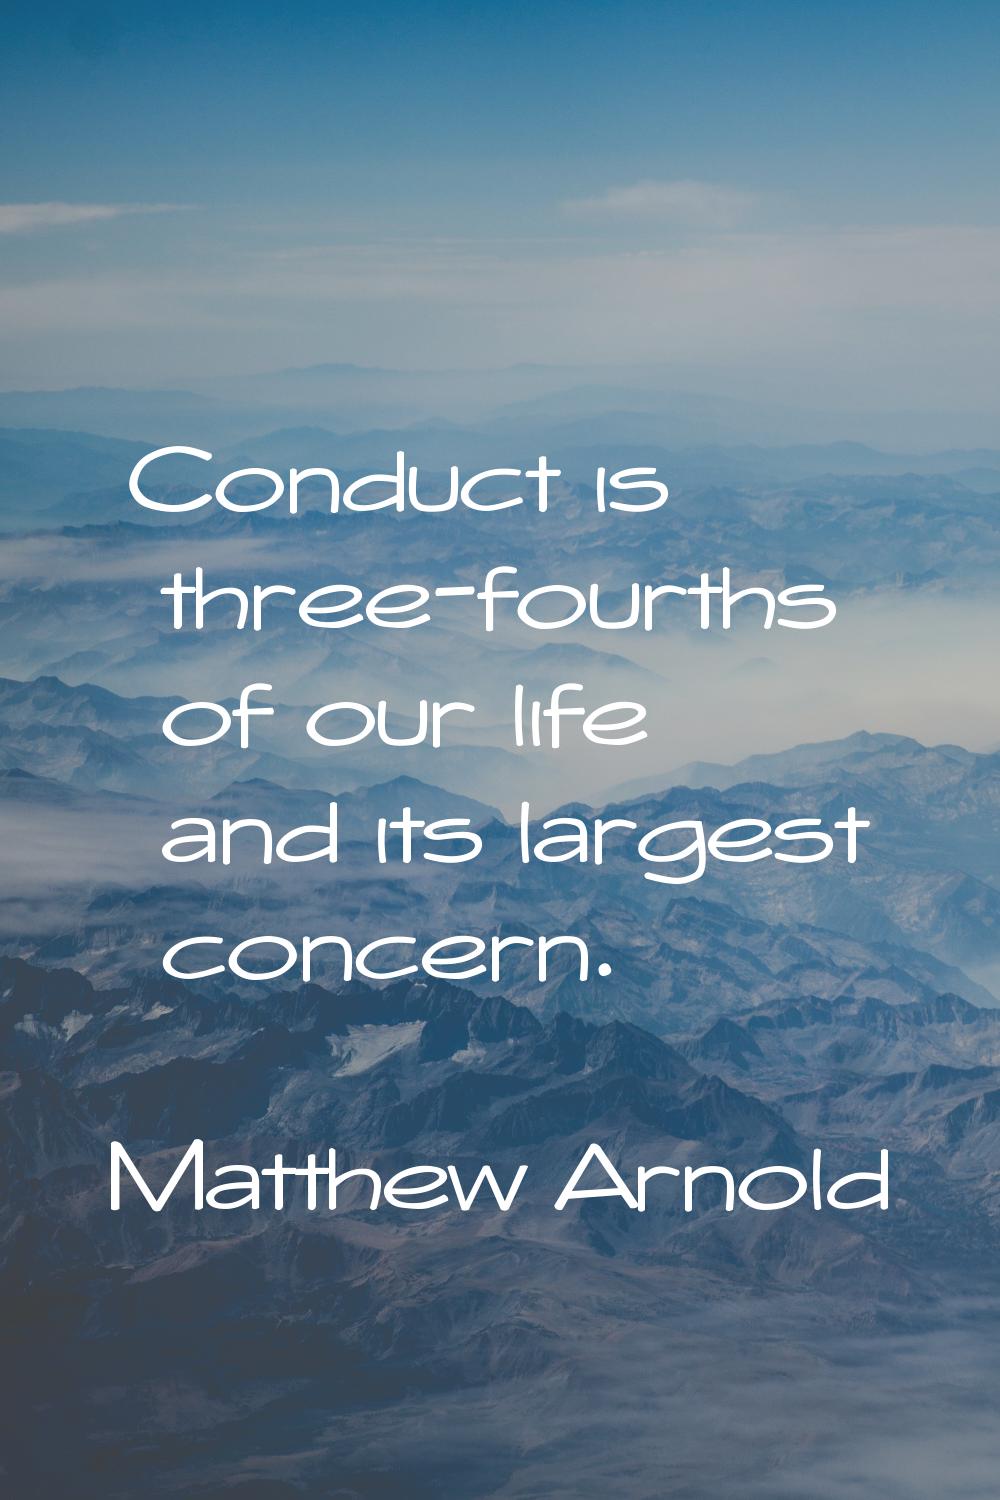 Conduct is three-fourths of our life and its largest concern.